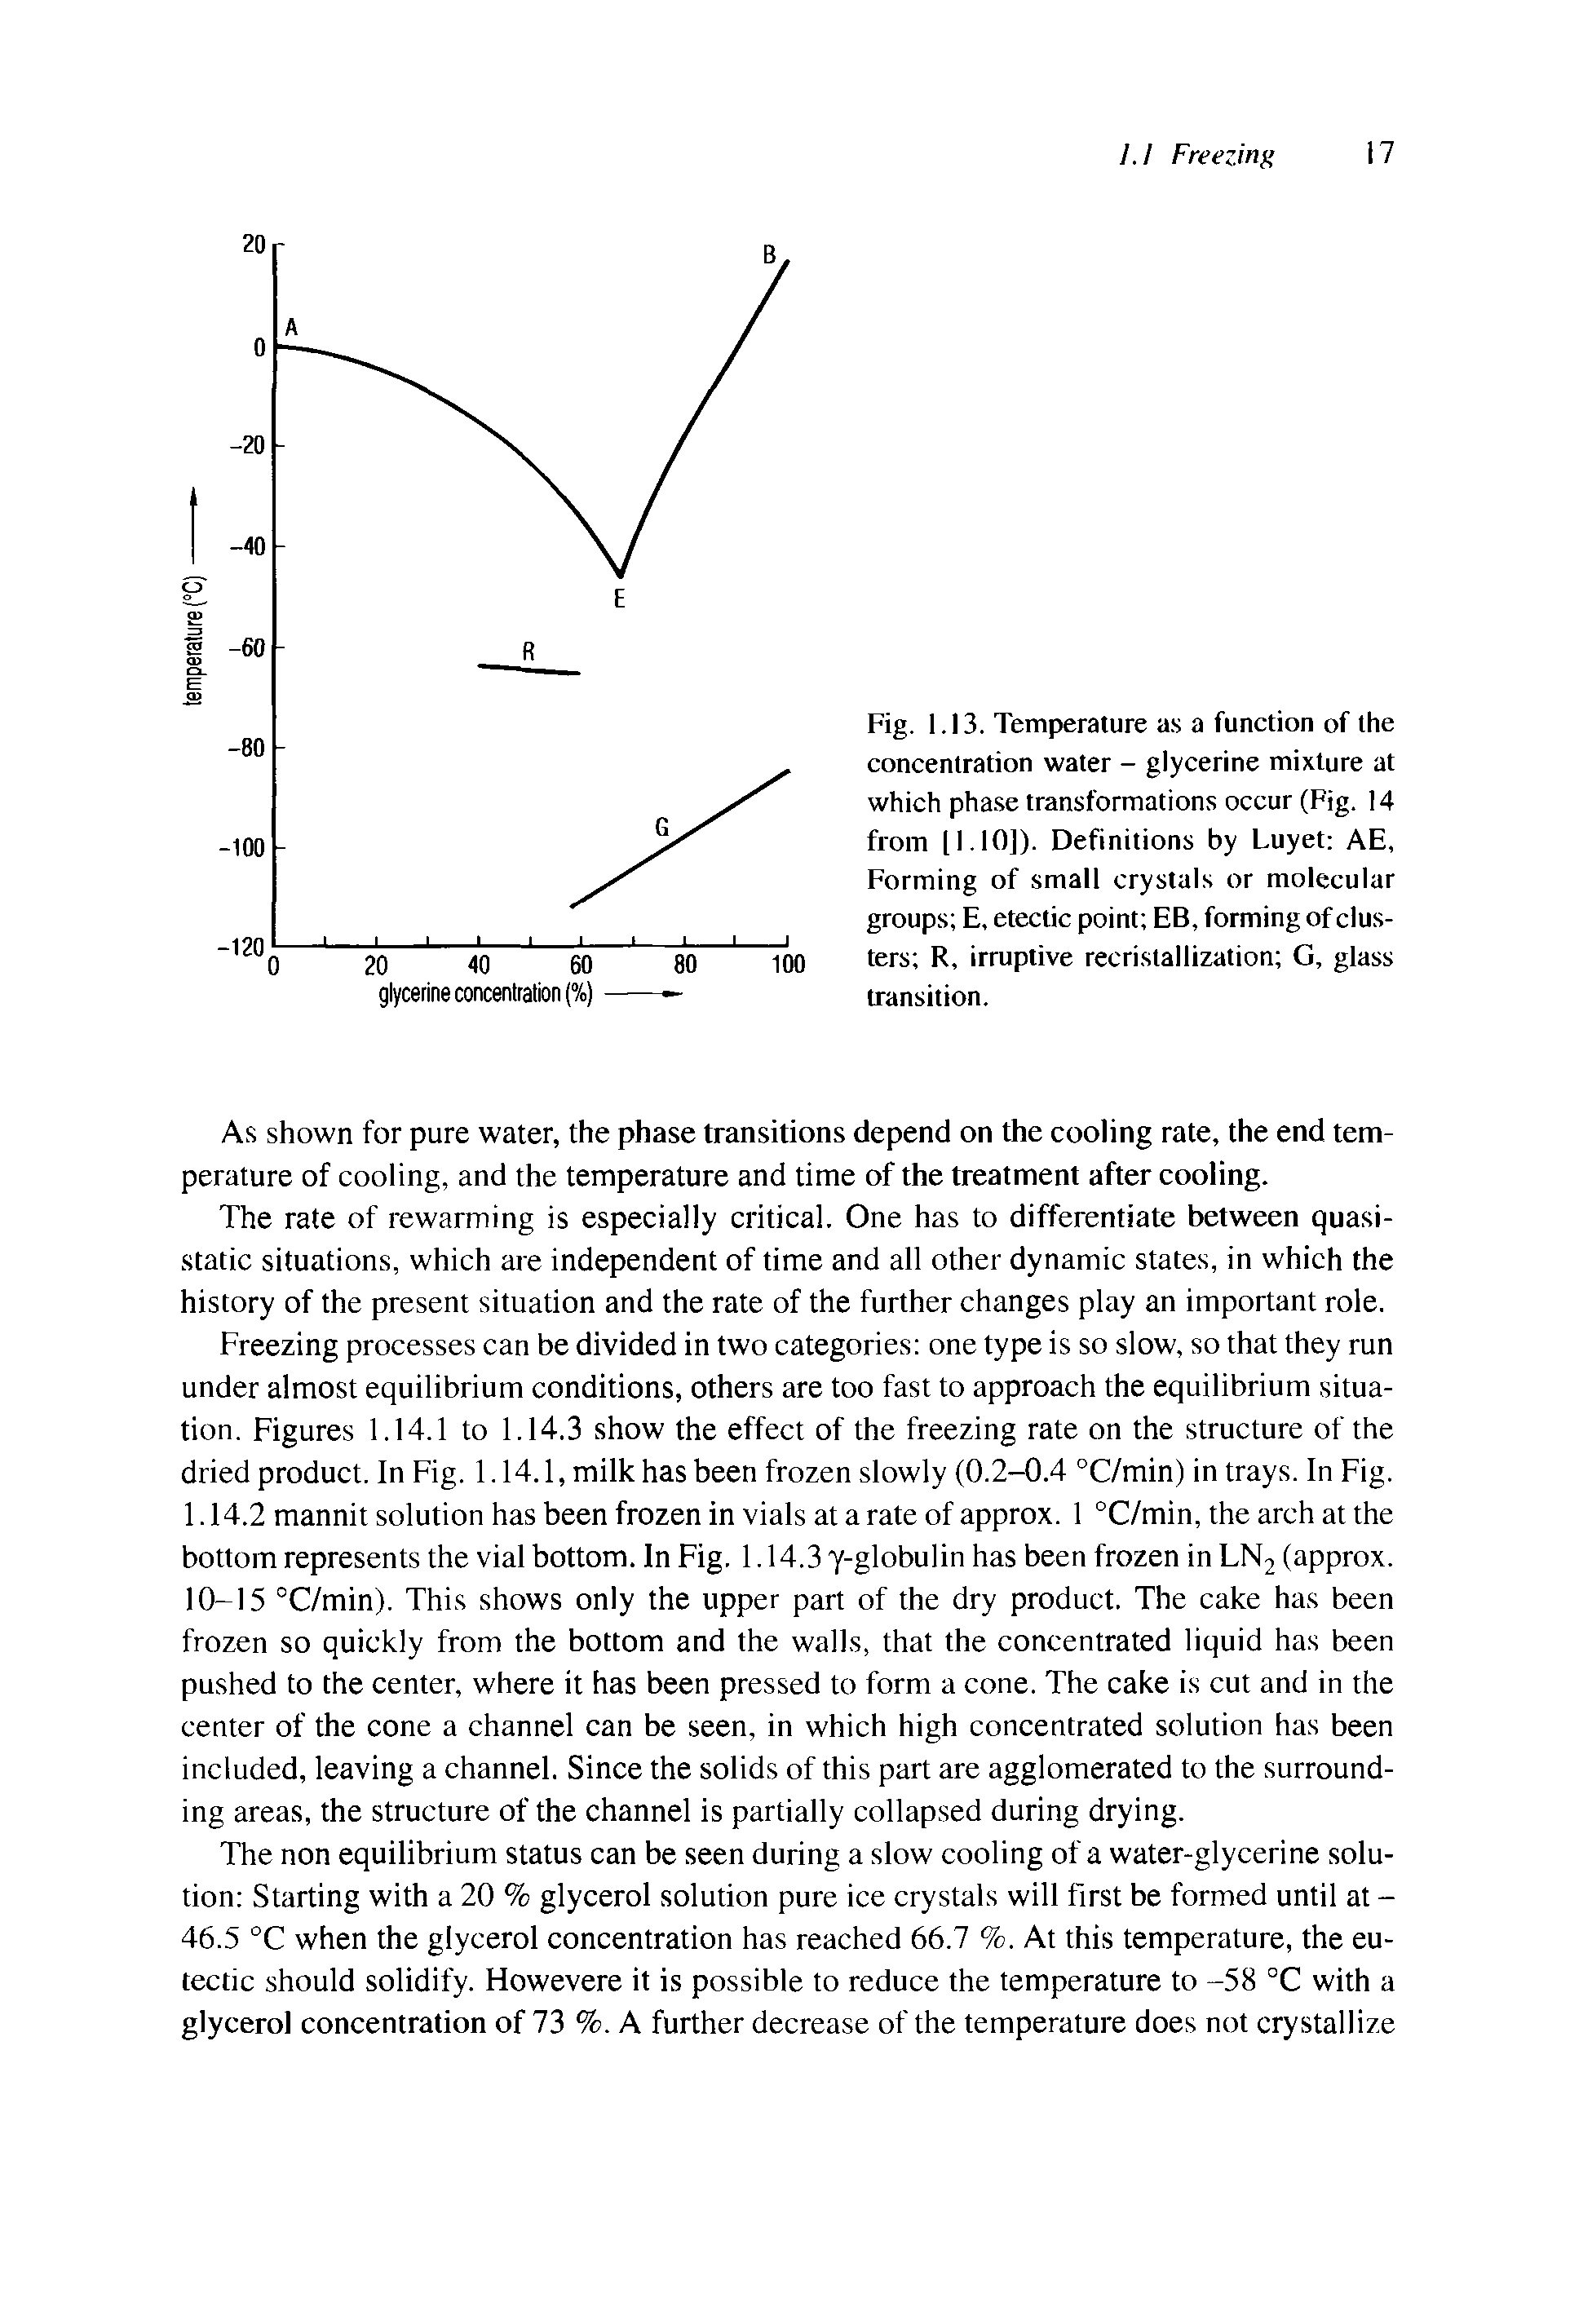 Fig. 1.13. Temperature as a function of the concentration water - glycerine mixture at which phase transformations occur (Fig. 14 from [1.10]). Definitions by Luyet AE, Forming of small crystals or molecular groups E, etectic point EB, forming of clusters R, irruptive recristallization G, glass transition.